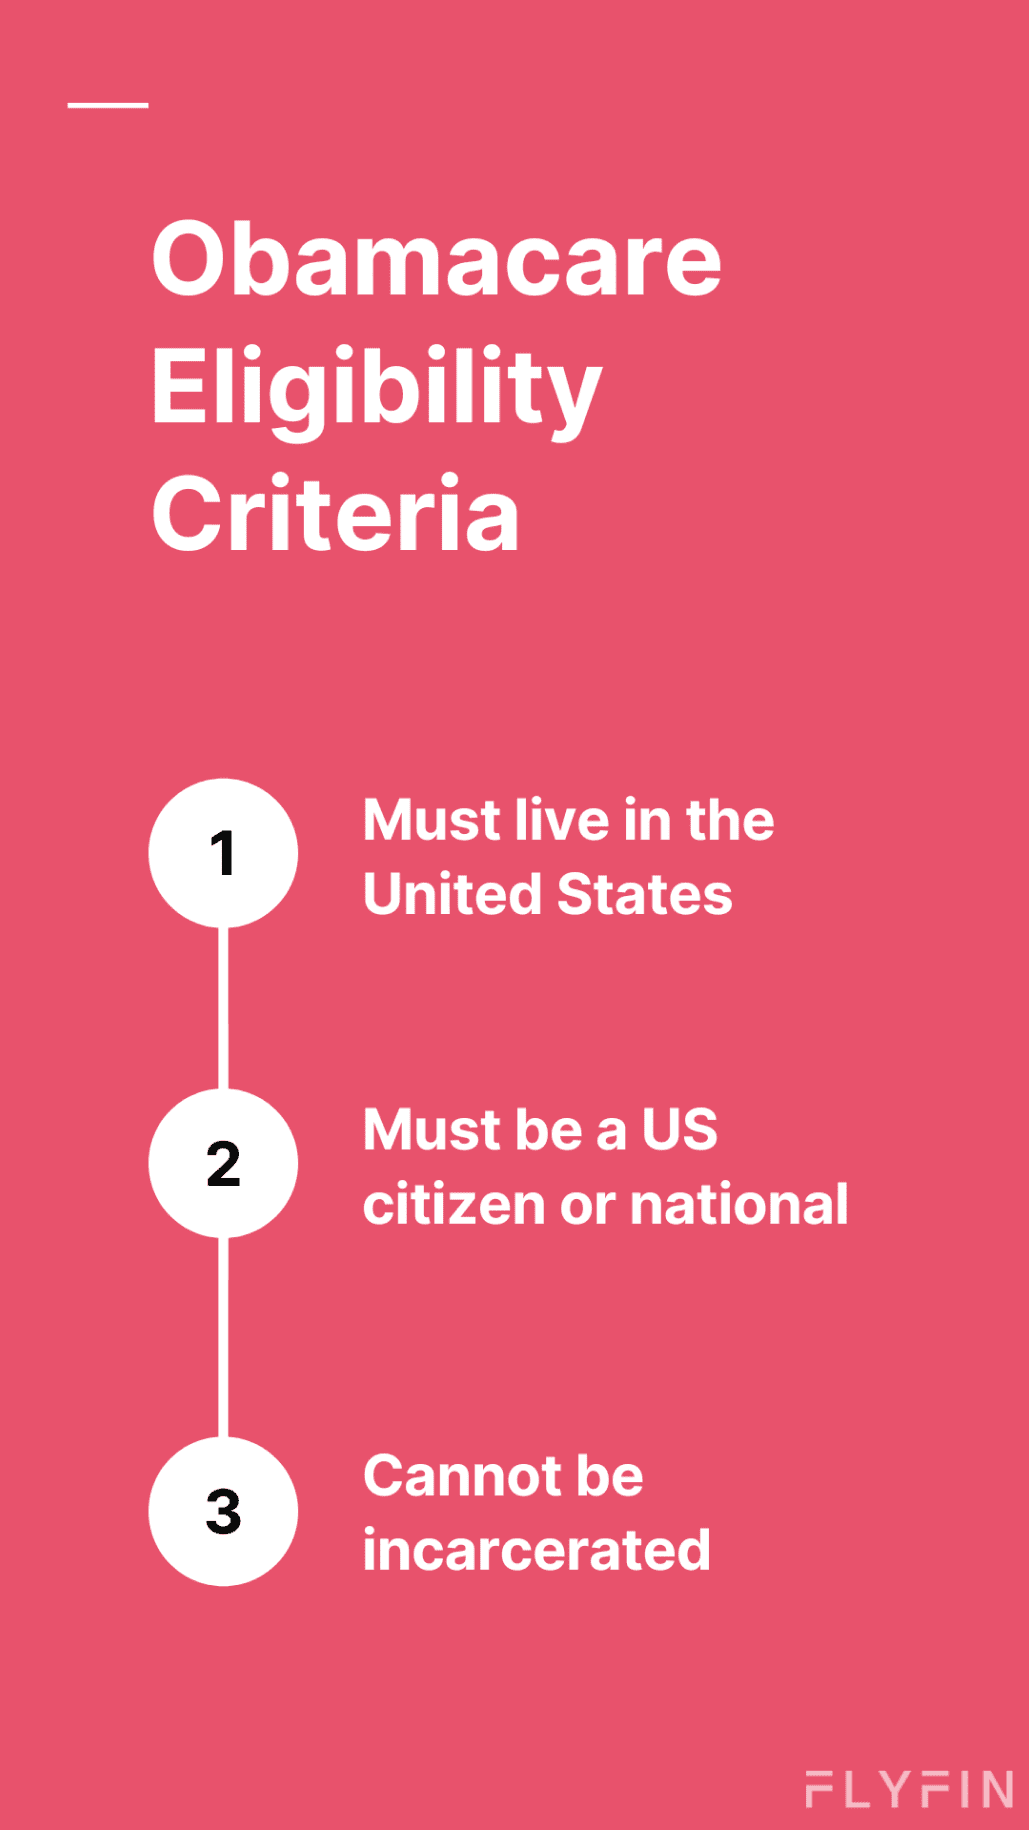 Image with text stating eligibility criteria for Obamacare in the United States. Must be a US citizen or national and cannot be incarcerated.